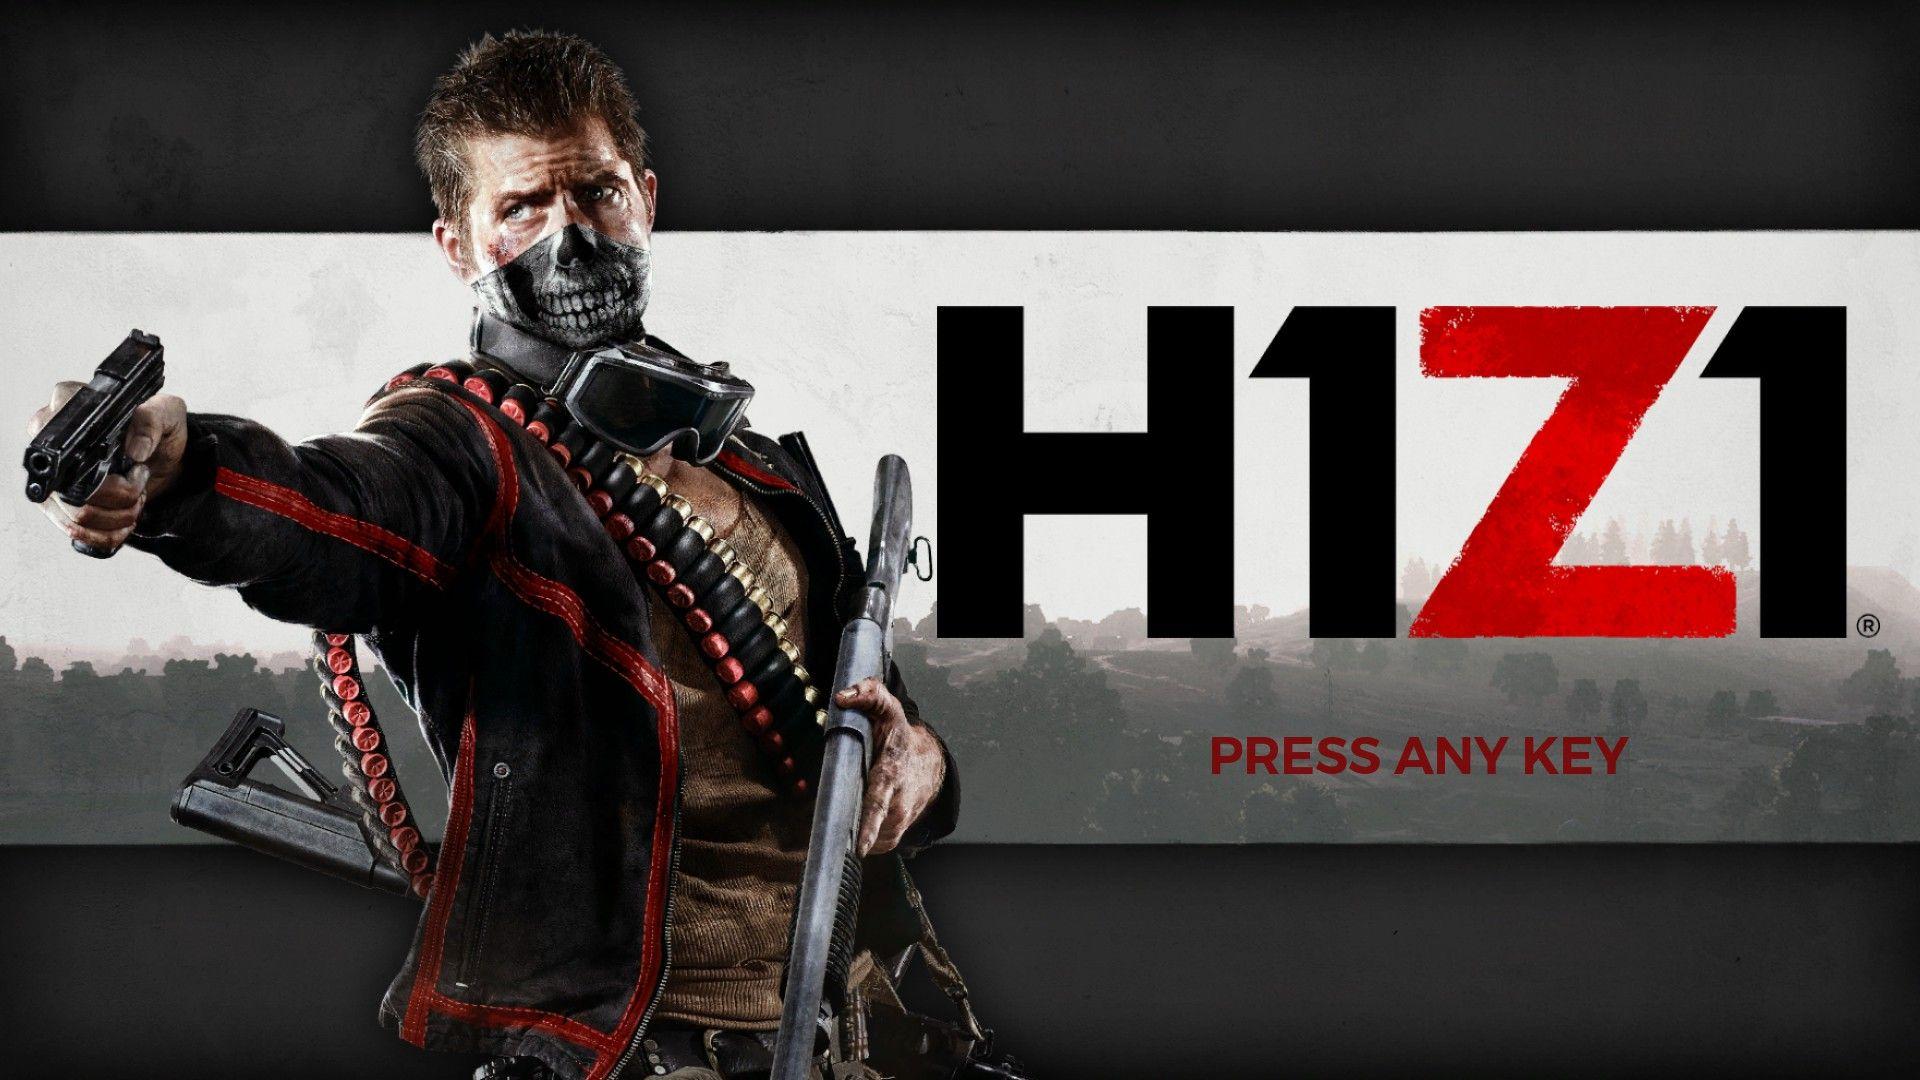 H1Z1 Logo - H1Z1 unveils new logo, drops King of the Kill subtitle